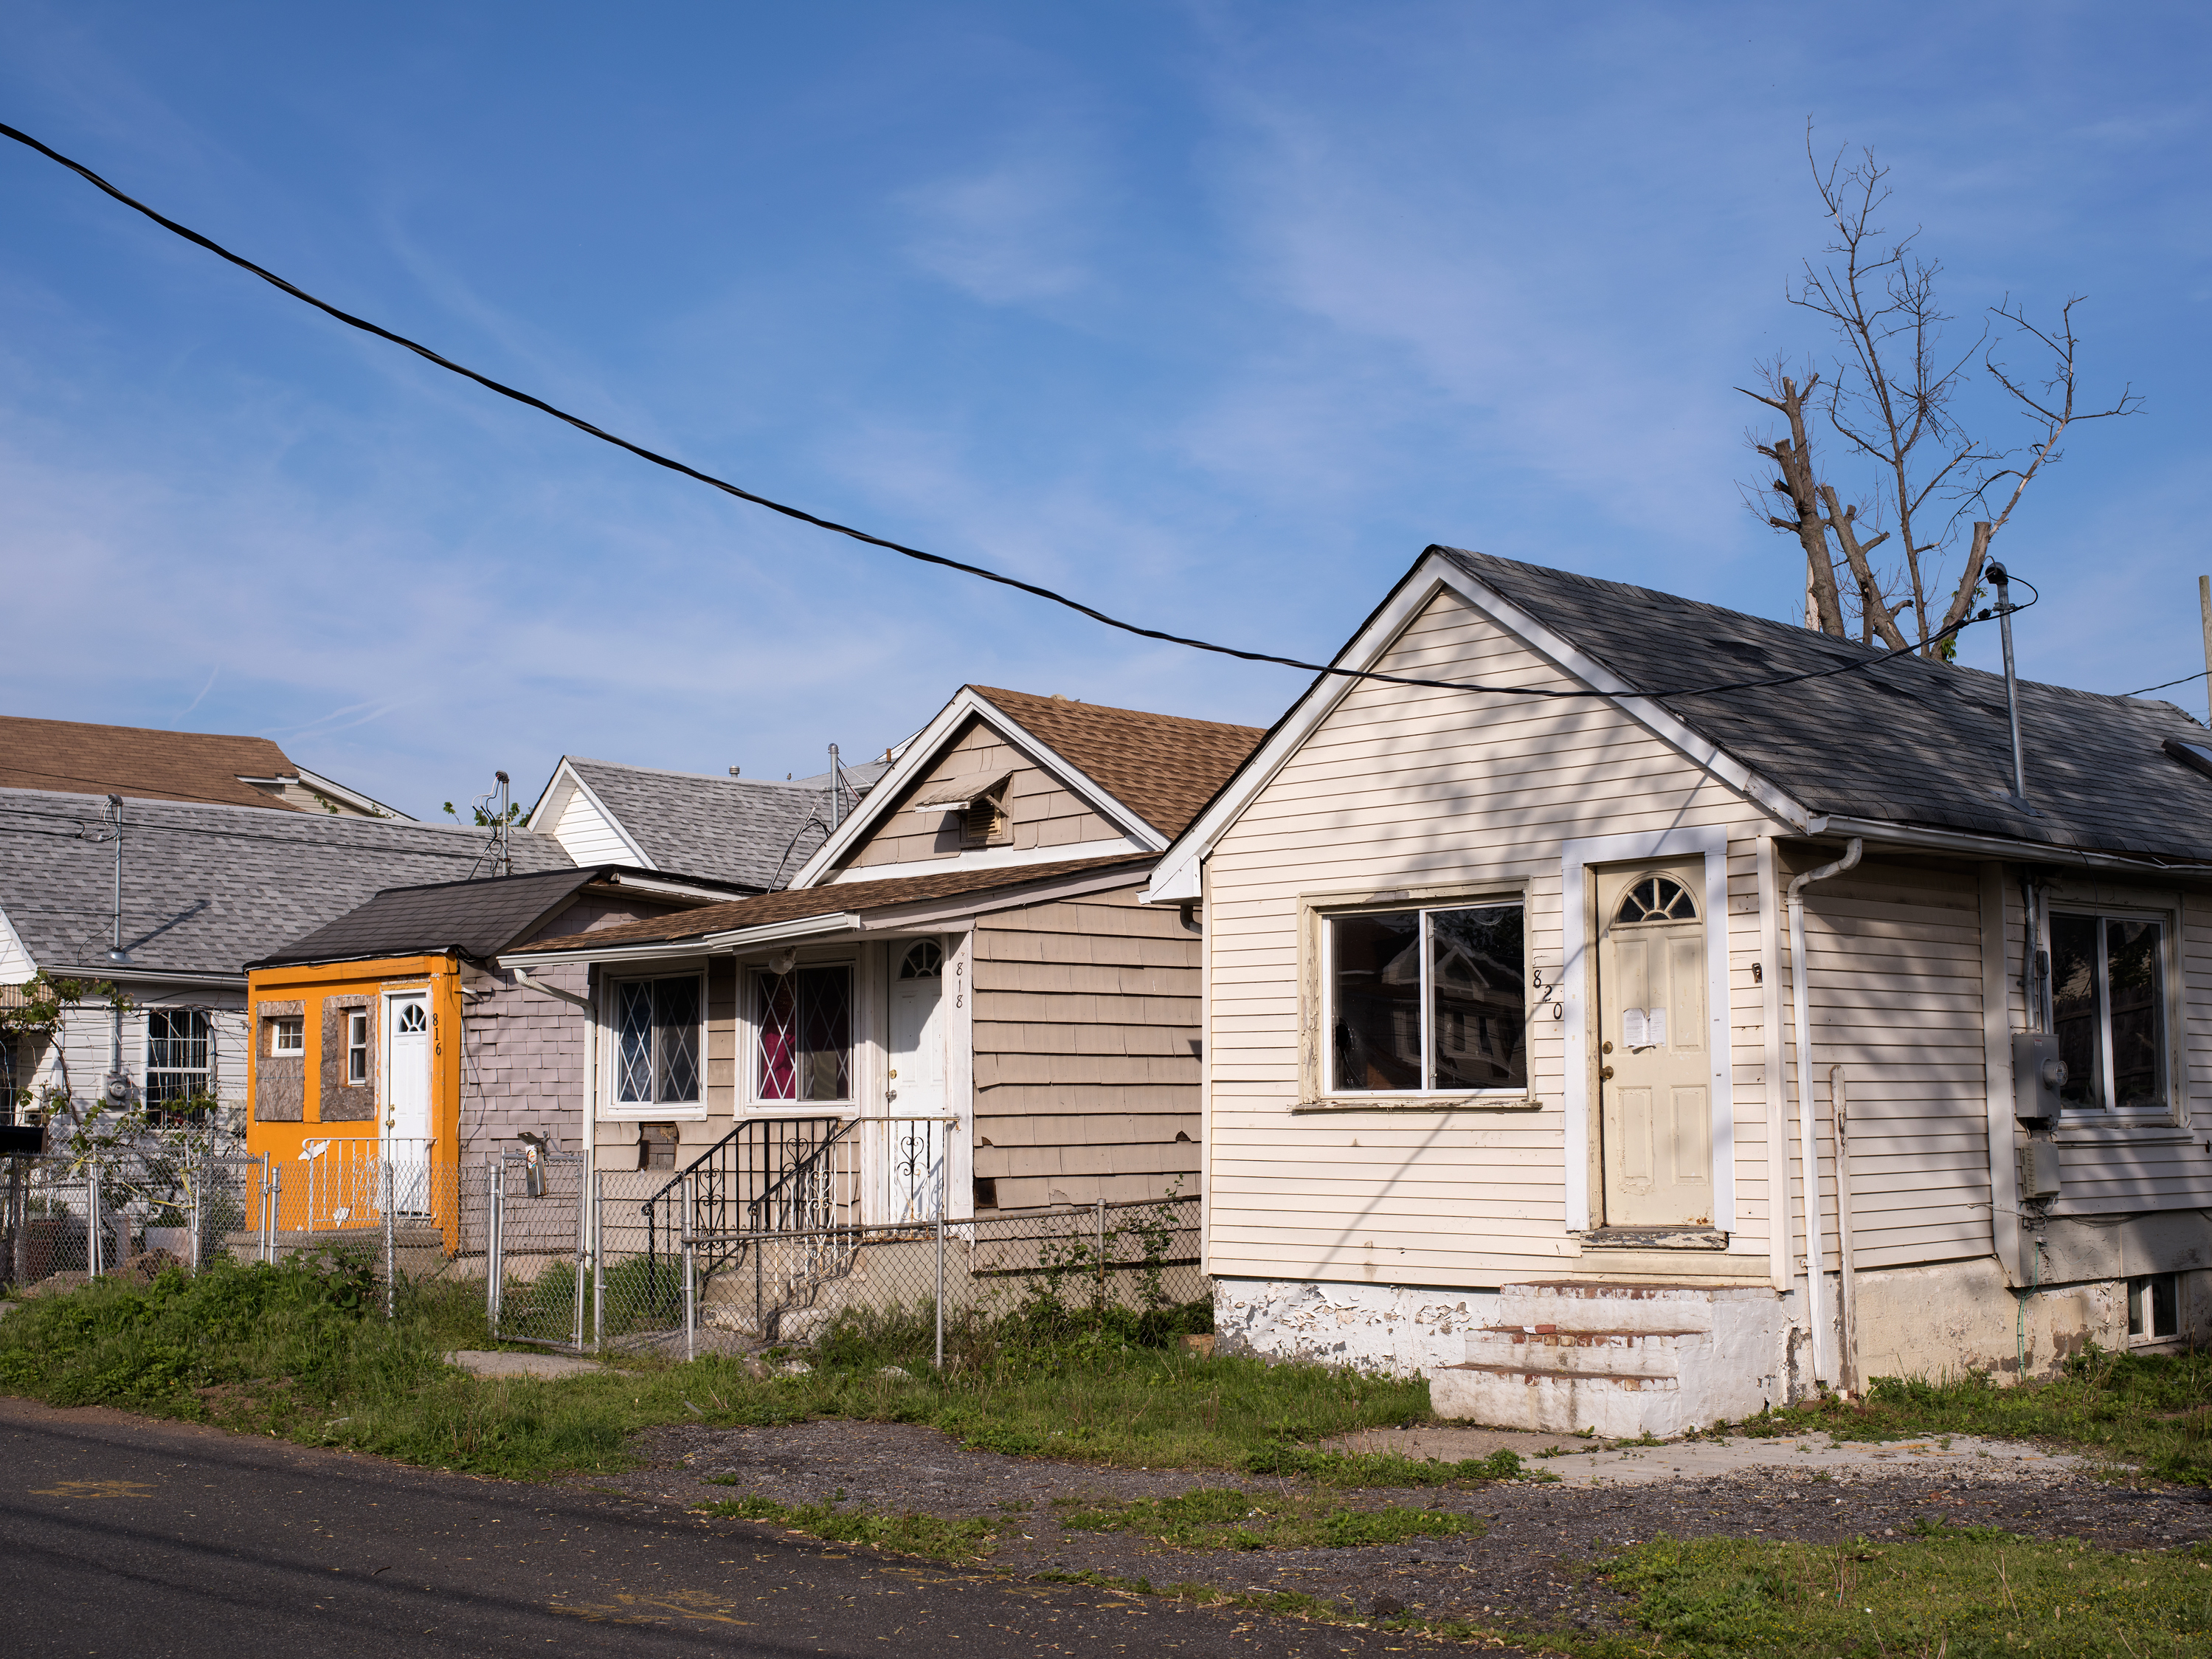 Some homes have fallen into disrepair in the Midland Beach neighborhood in Staten Island, N.Y. Almost four years since the destruction caused by Superstorm Sandy, many are still dealing with the storm's consequences. Bryan Thomas for NPR